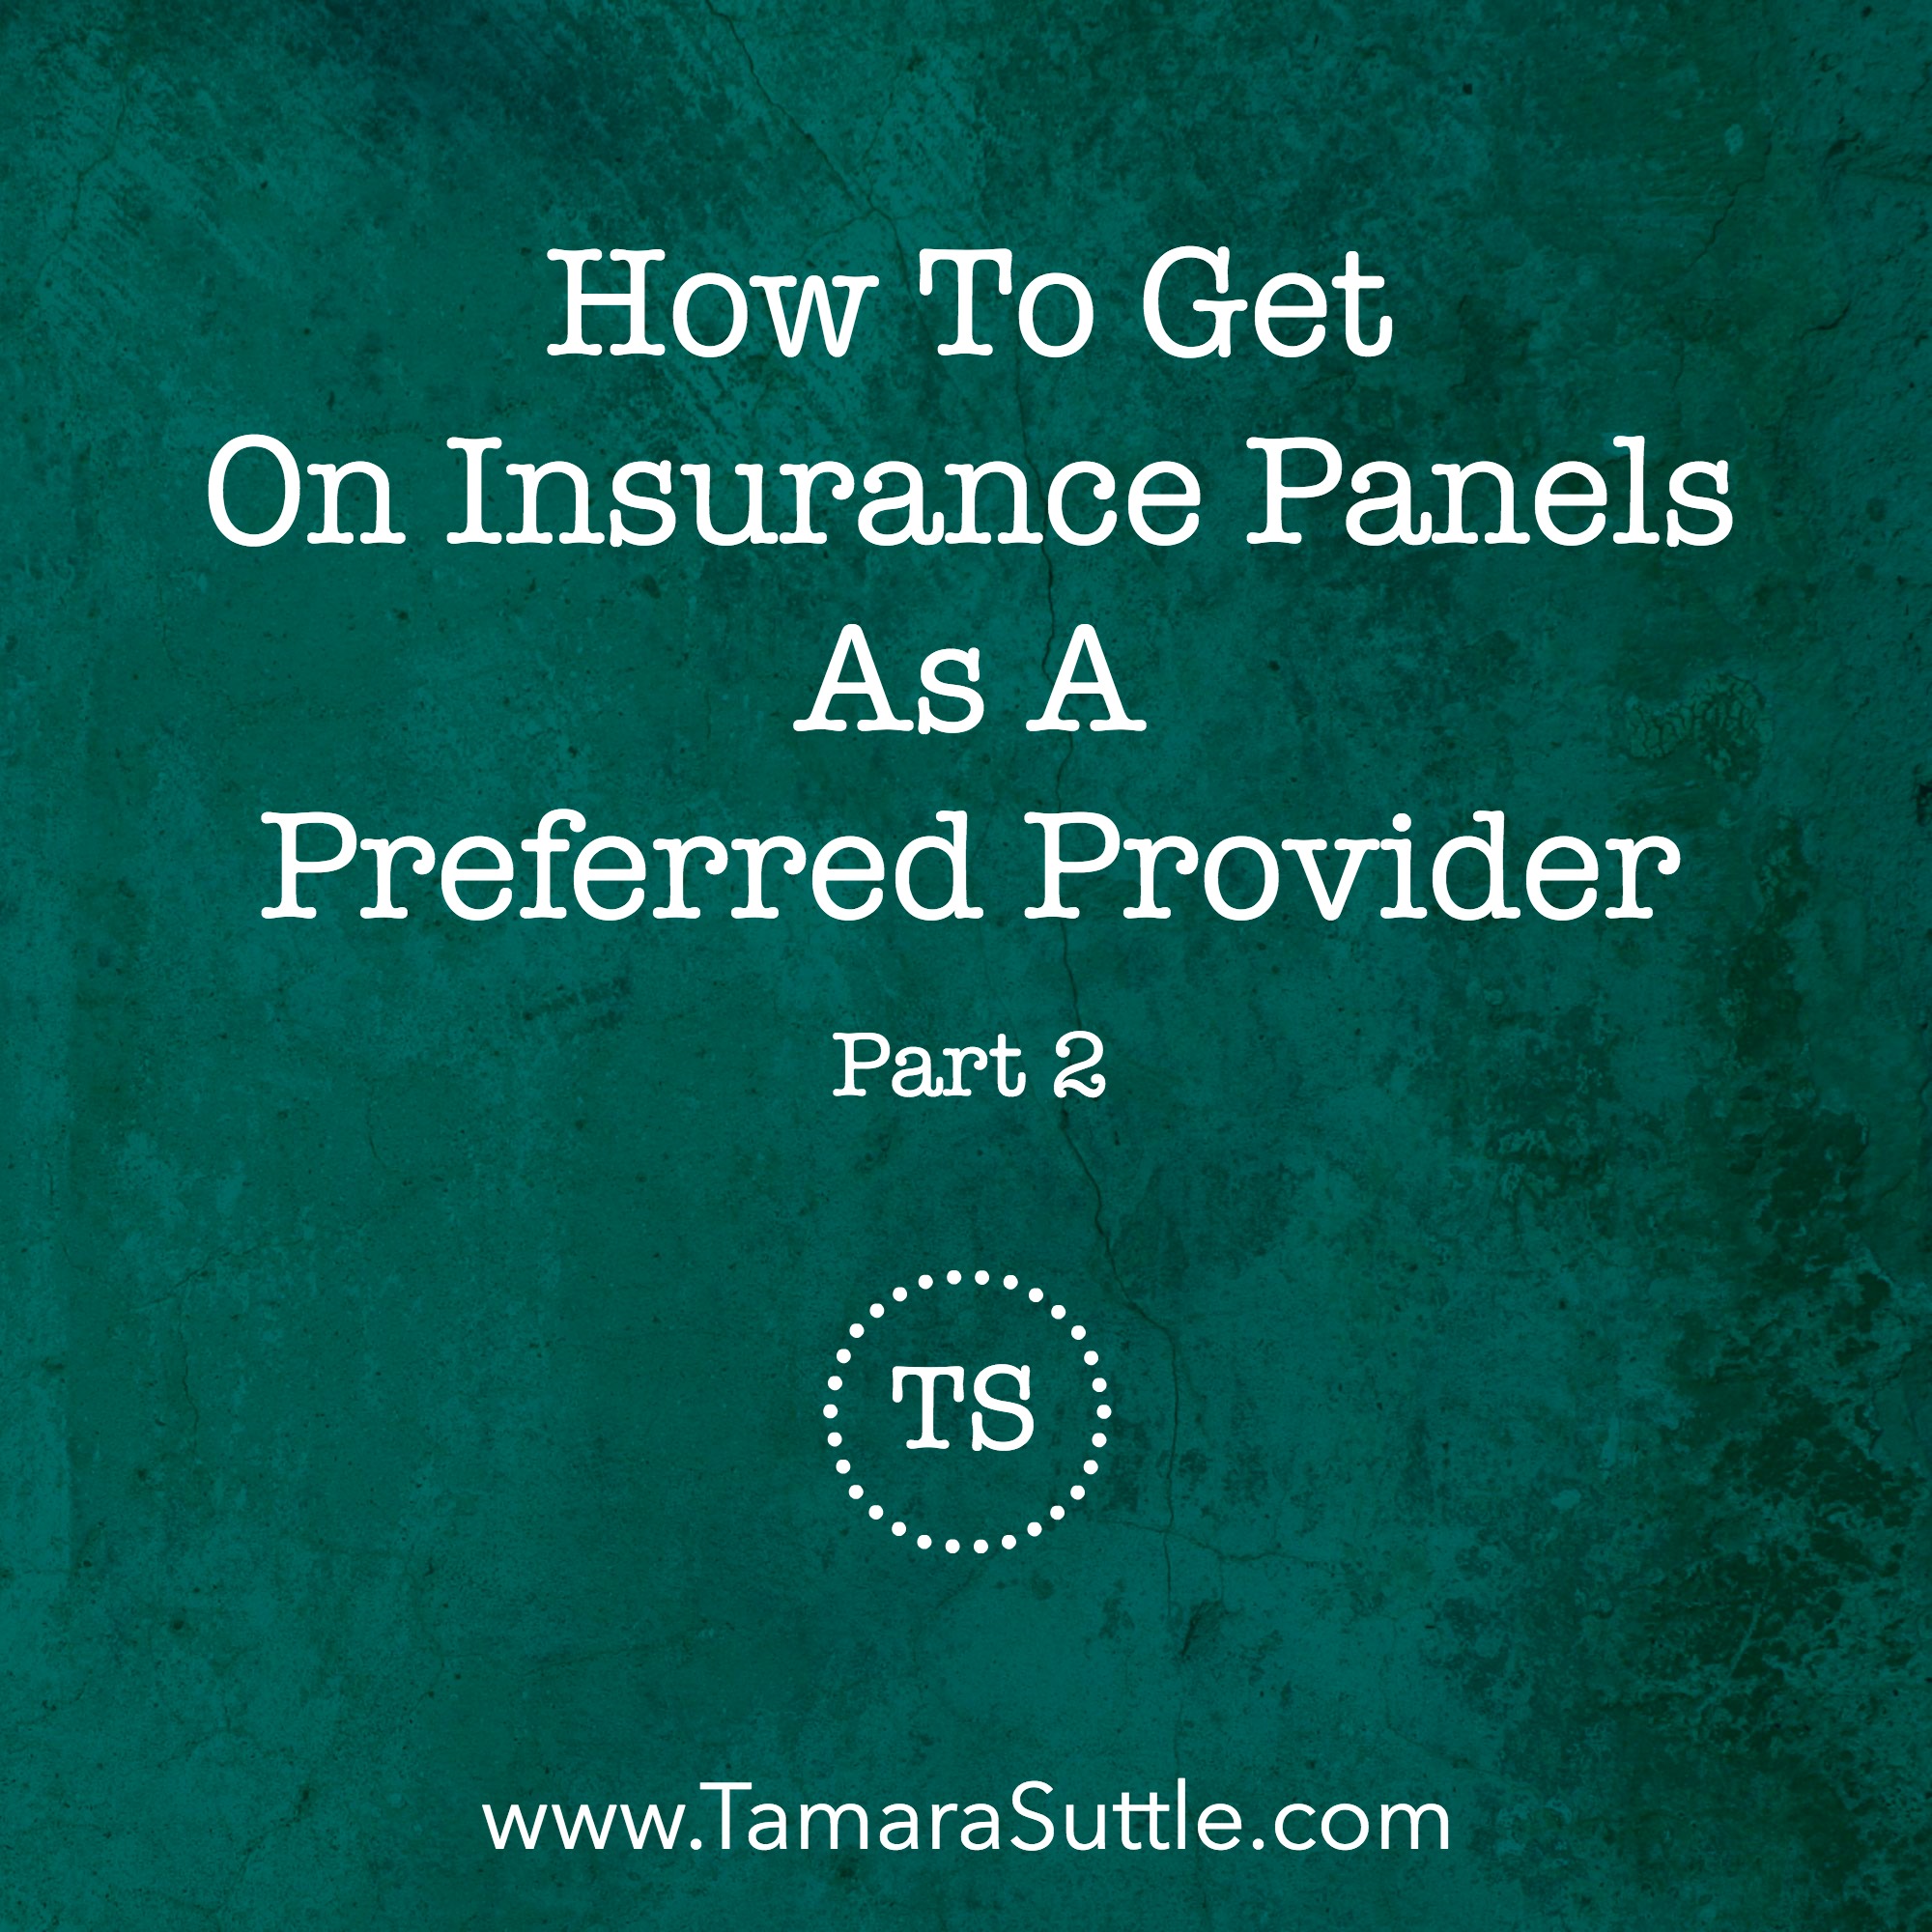 Medical Credentialing Service, Get on Insurance Panels